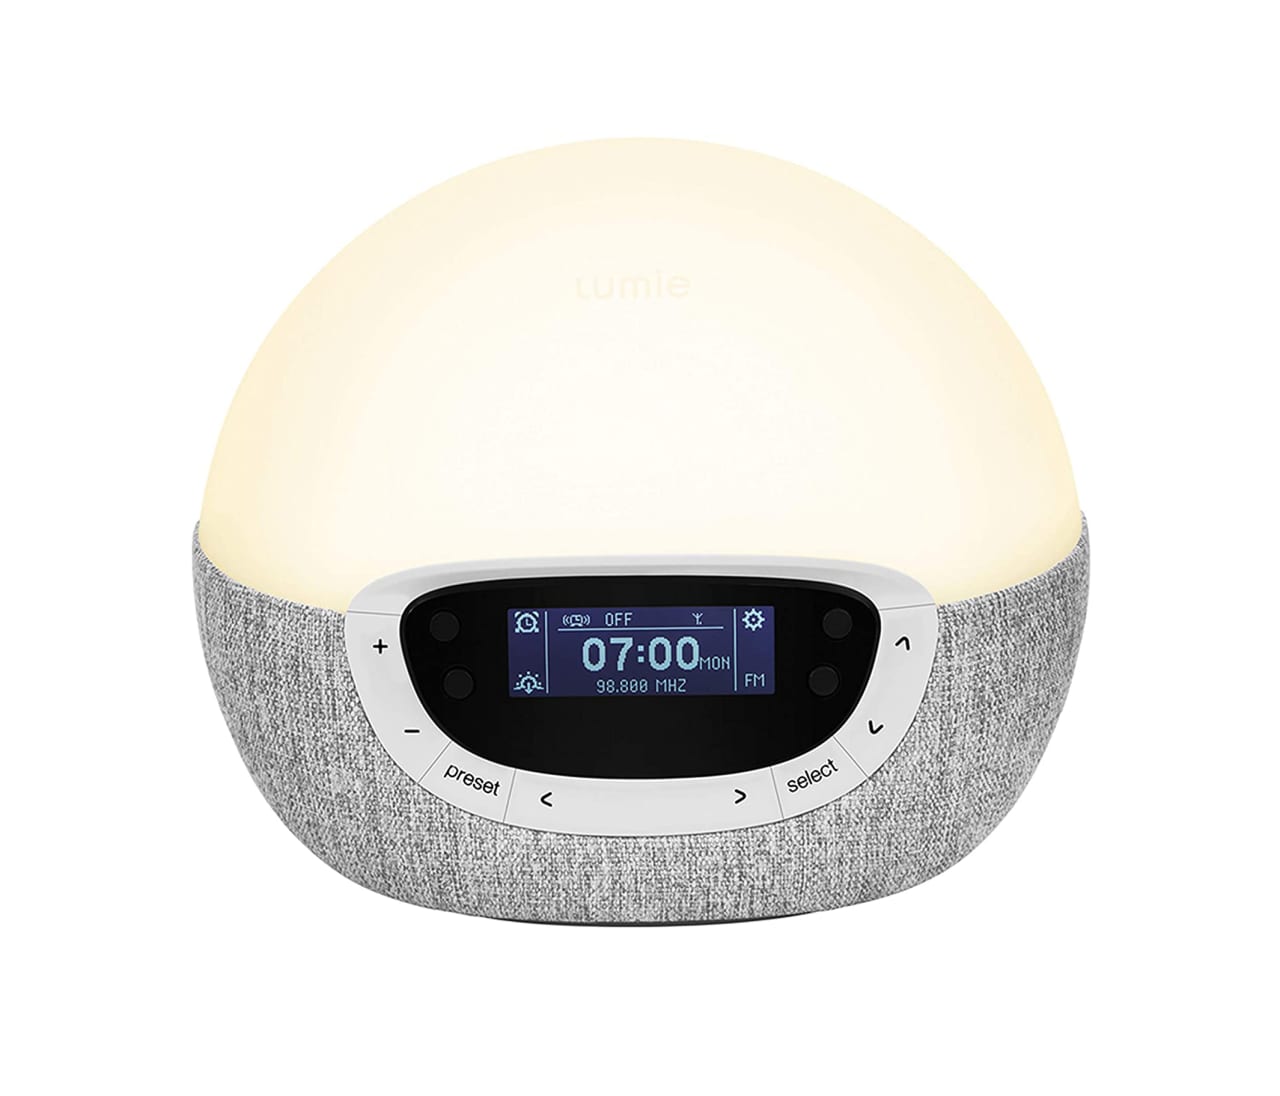  Philips SmartSleep Wake-up Light, Colored Sunrise and Sunset  Simulation, 5 Natural Sounds, FM Radio & Reading Lamp, Tap Snooze,  HF3520/60 : Home & Kitchen